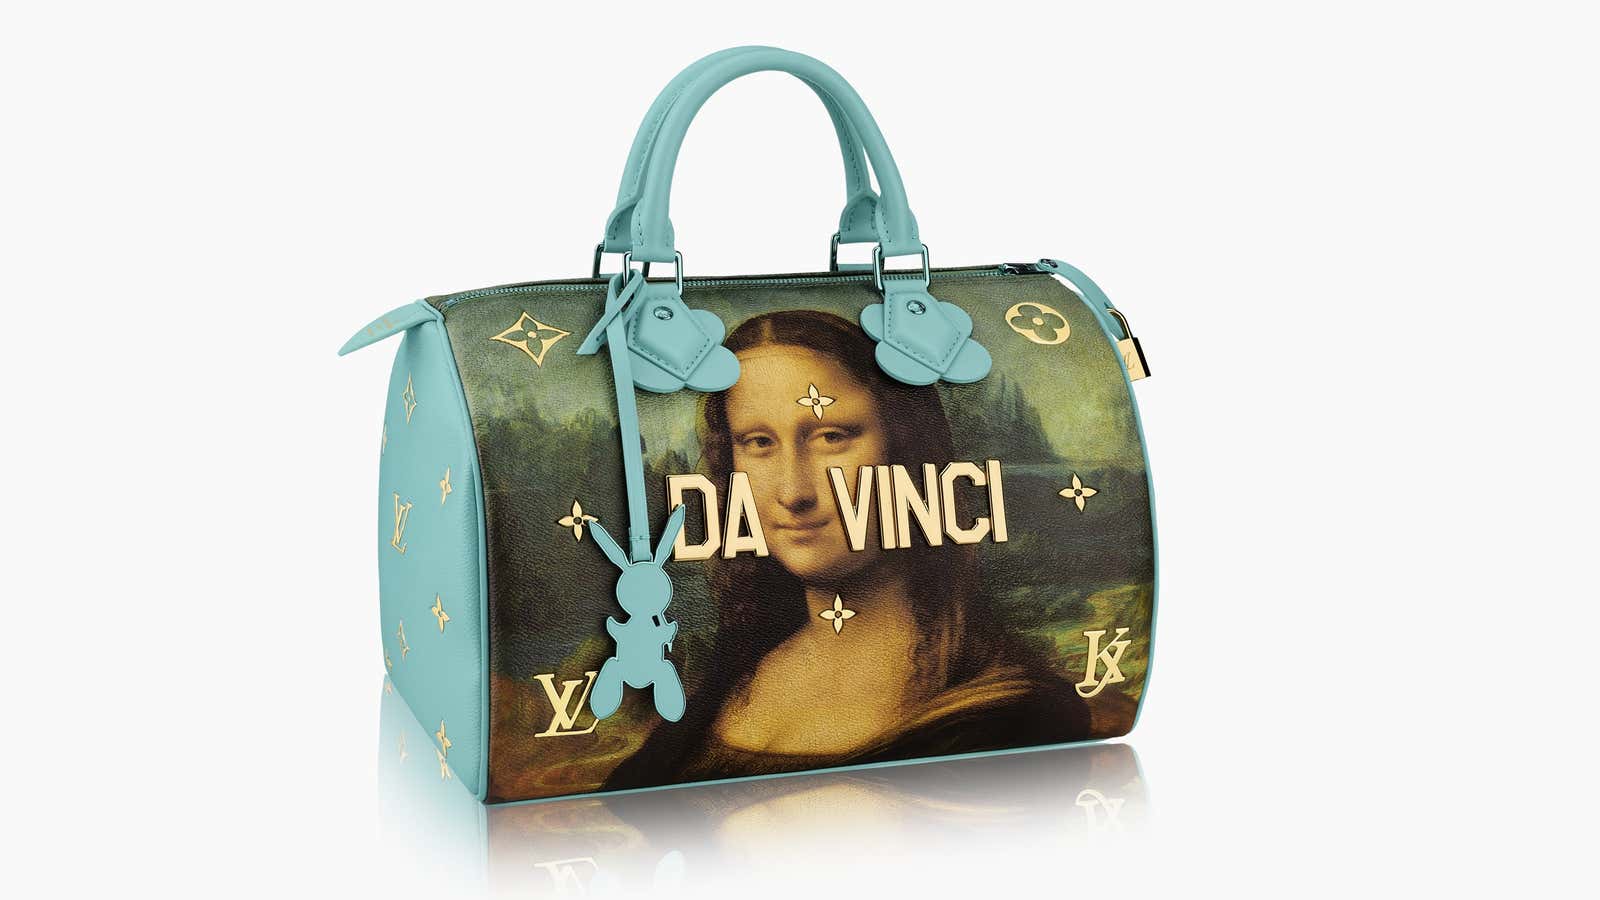 Louis Vuitton and Jeff Koons teamed up to make classic art